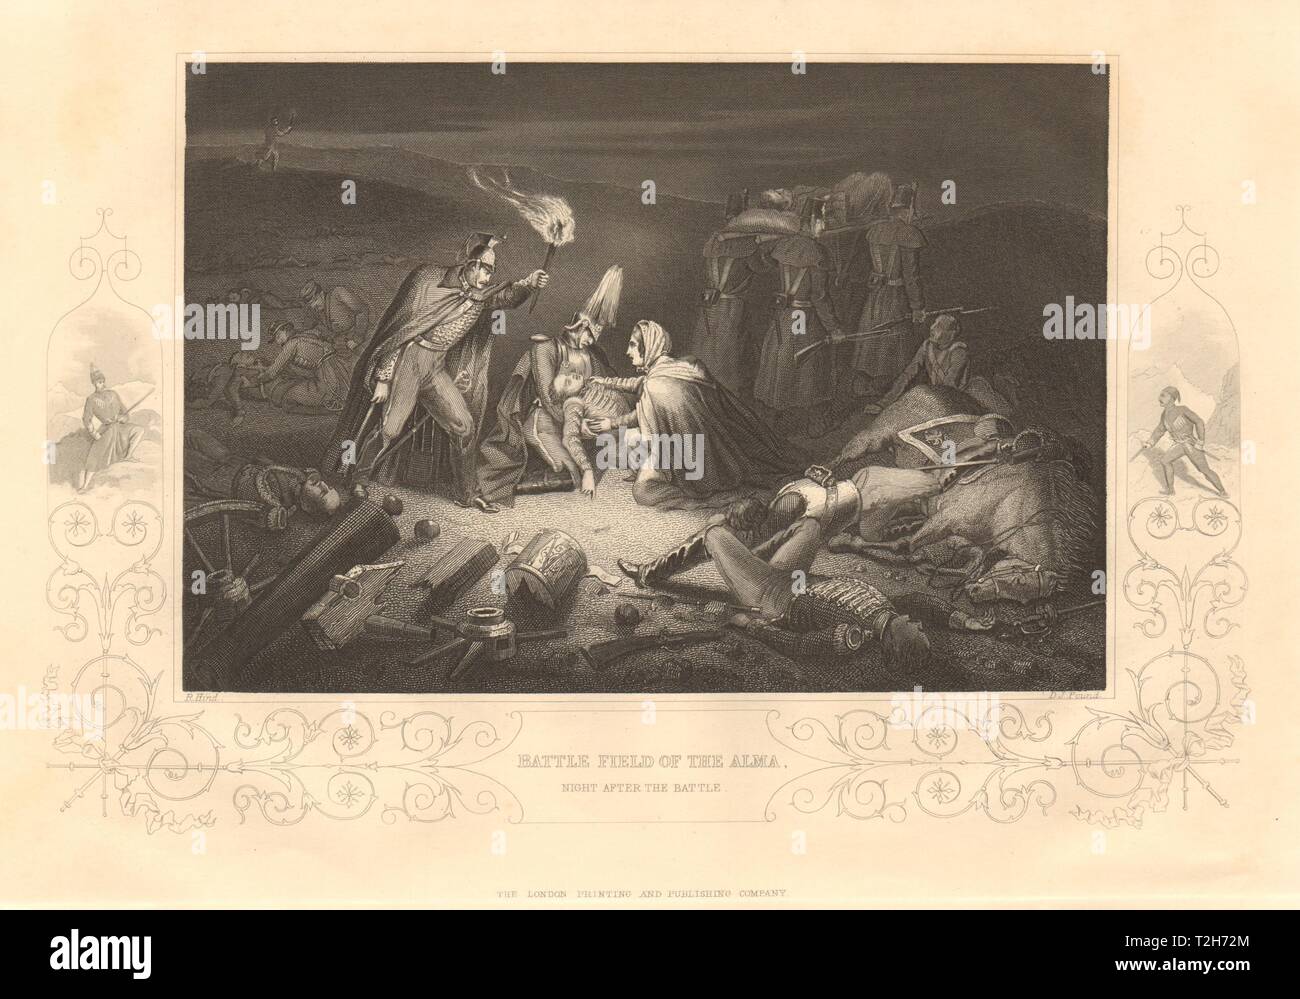 CRIMEAN WAR. Battlefield of the Alma, the night after the battle 1860 print Stock Photo